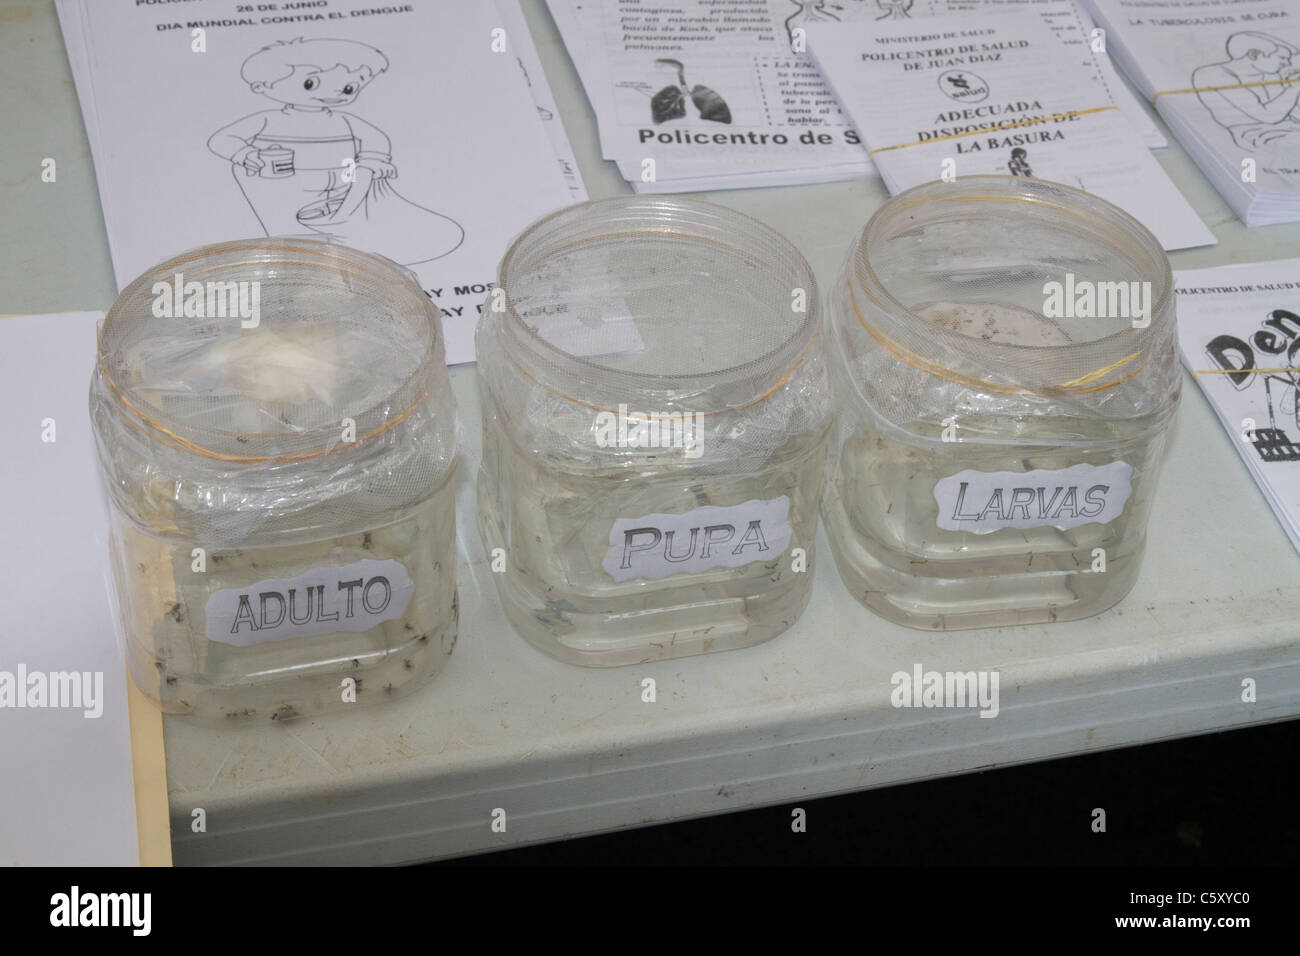 Jars containing Aedes aegypti larvae, pupa and adult mosquitoes for public health demonstration purposes Stock Photo